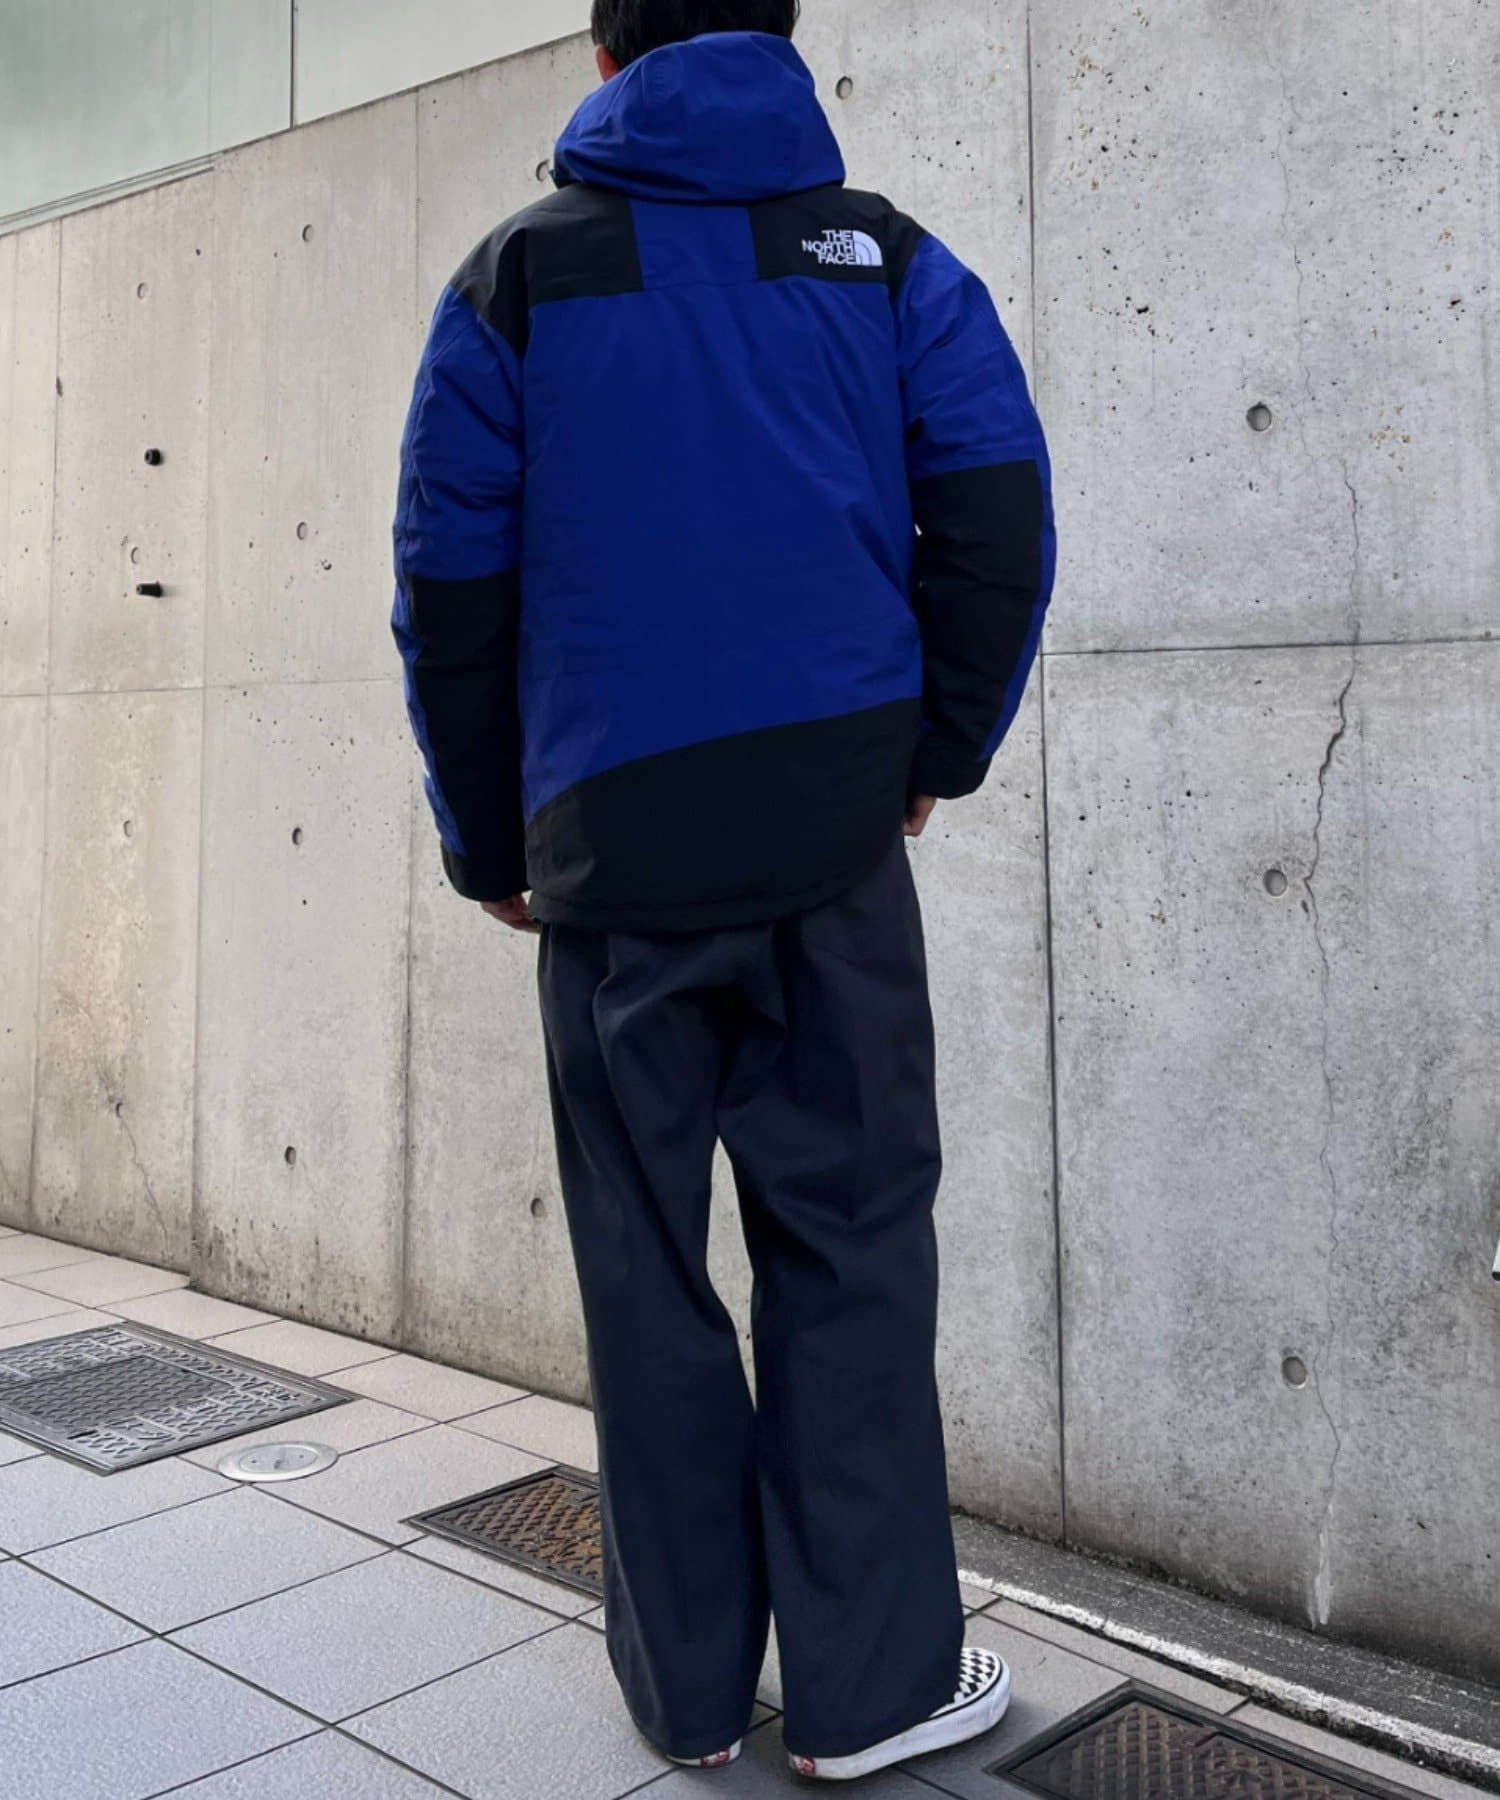 THE NORTH FACE】Mountain Down Jacket | CIAOPANIC(チャオパニック 